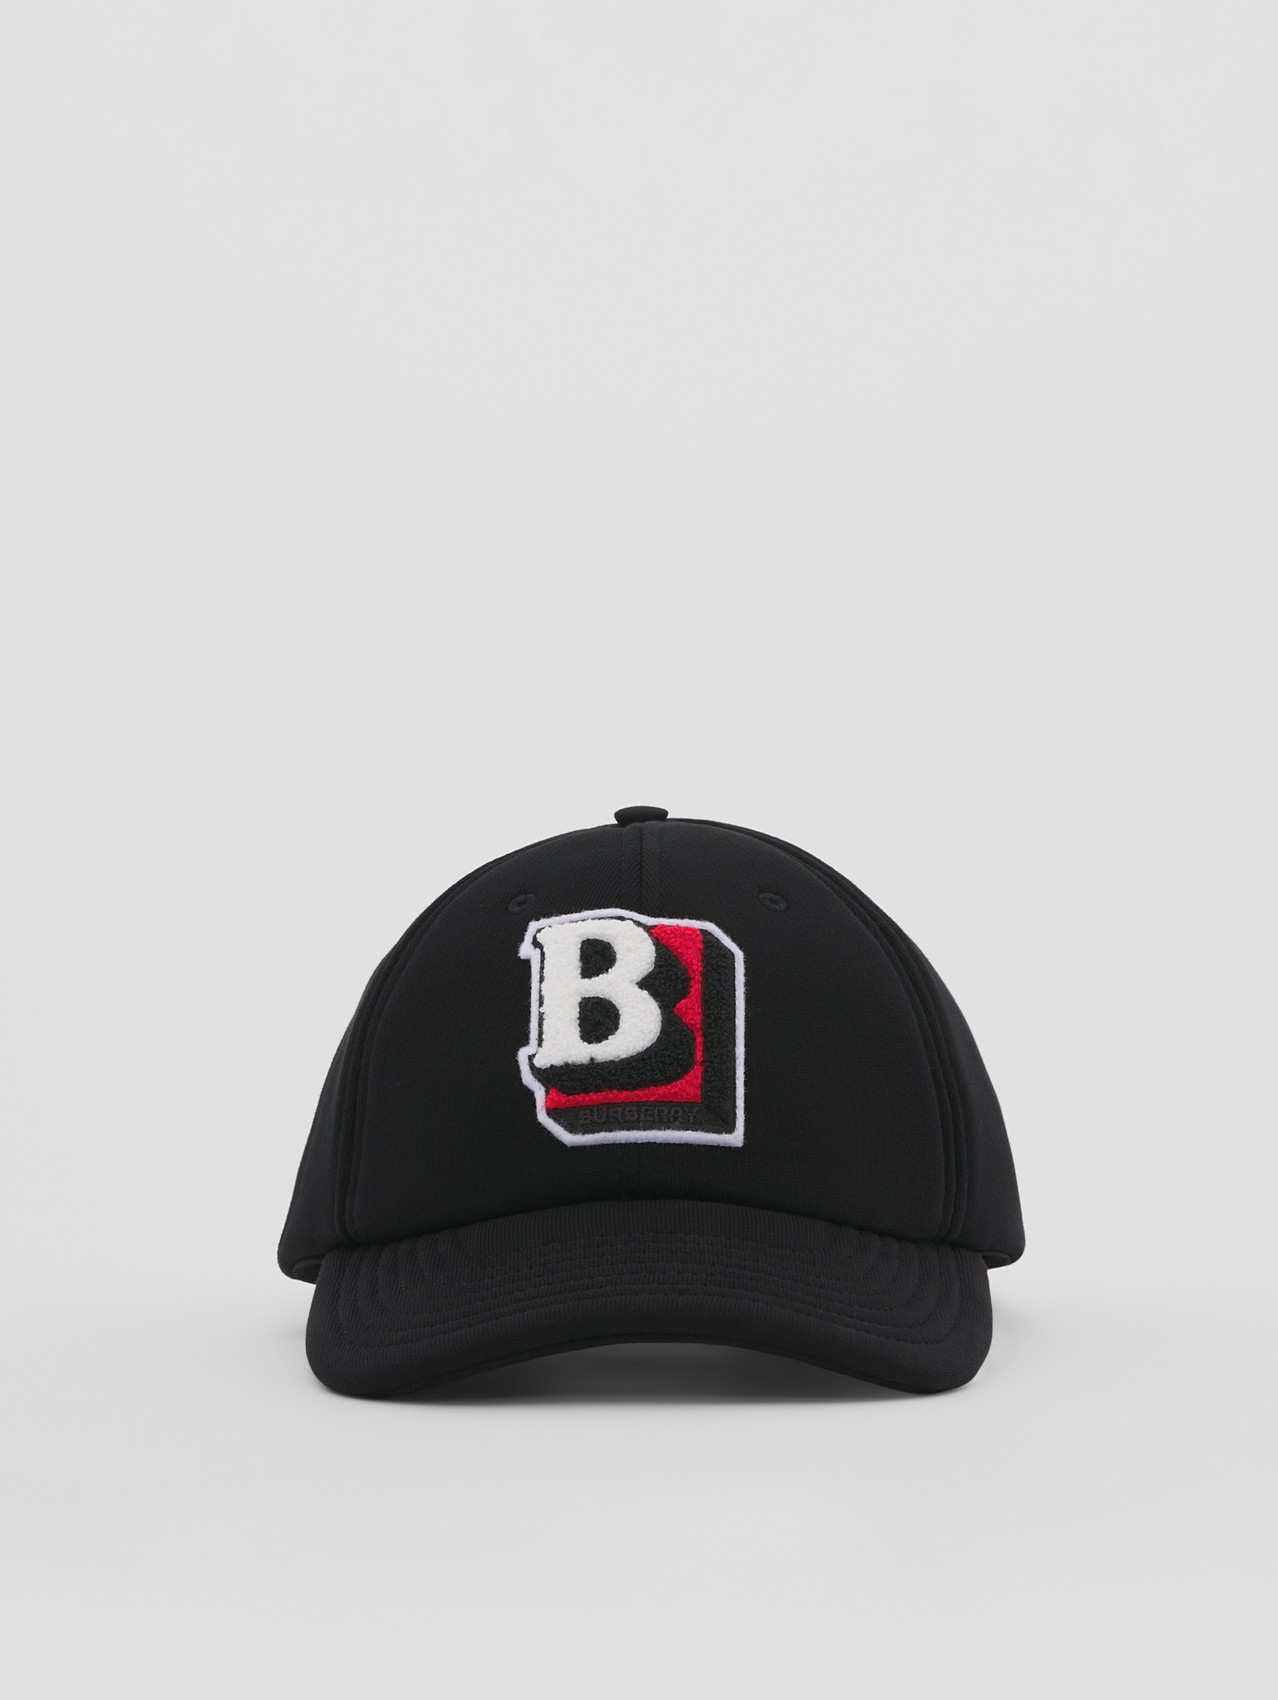 Letter Graphic Cotton Baseball Cap in Black/red